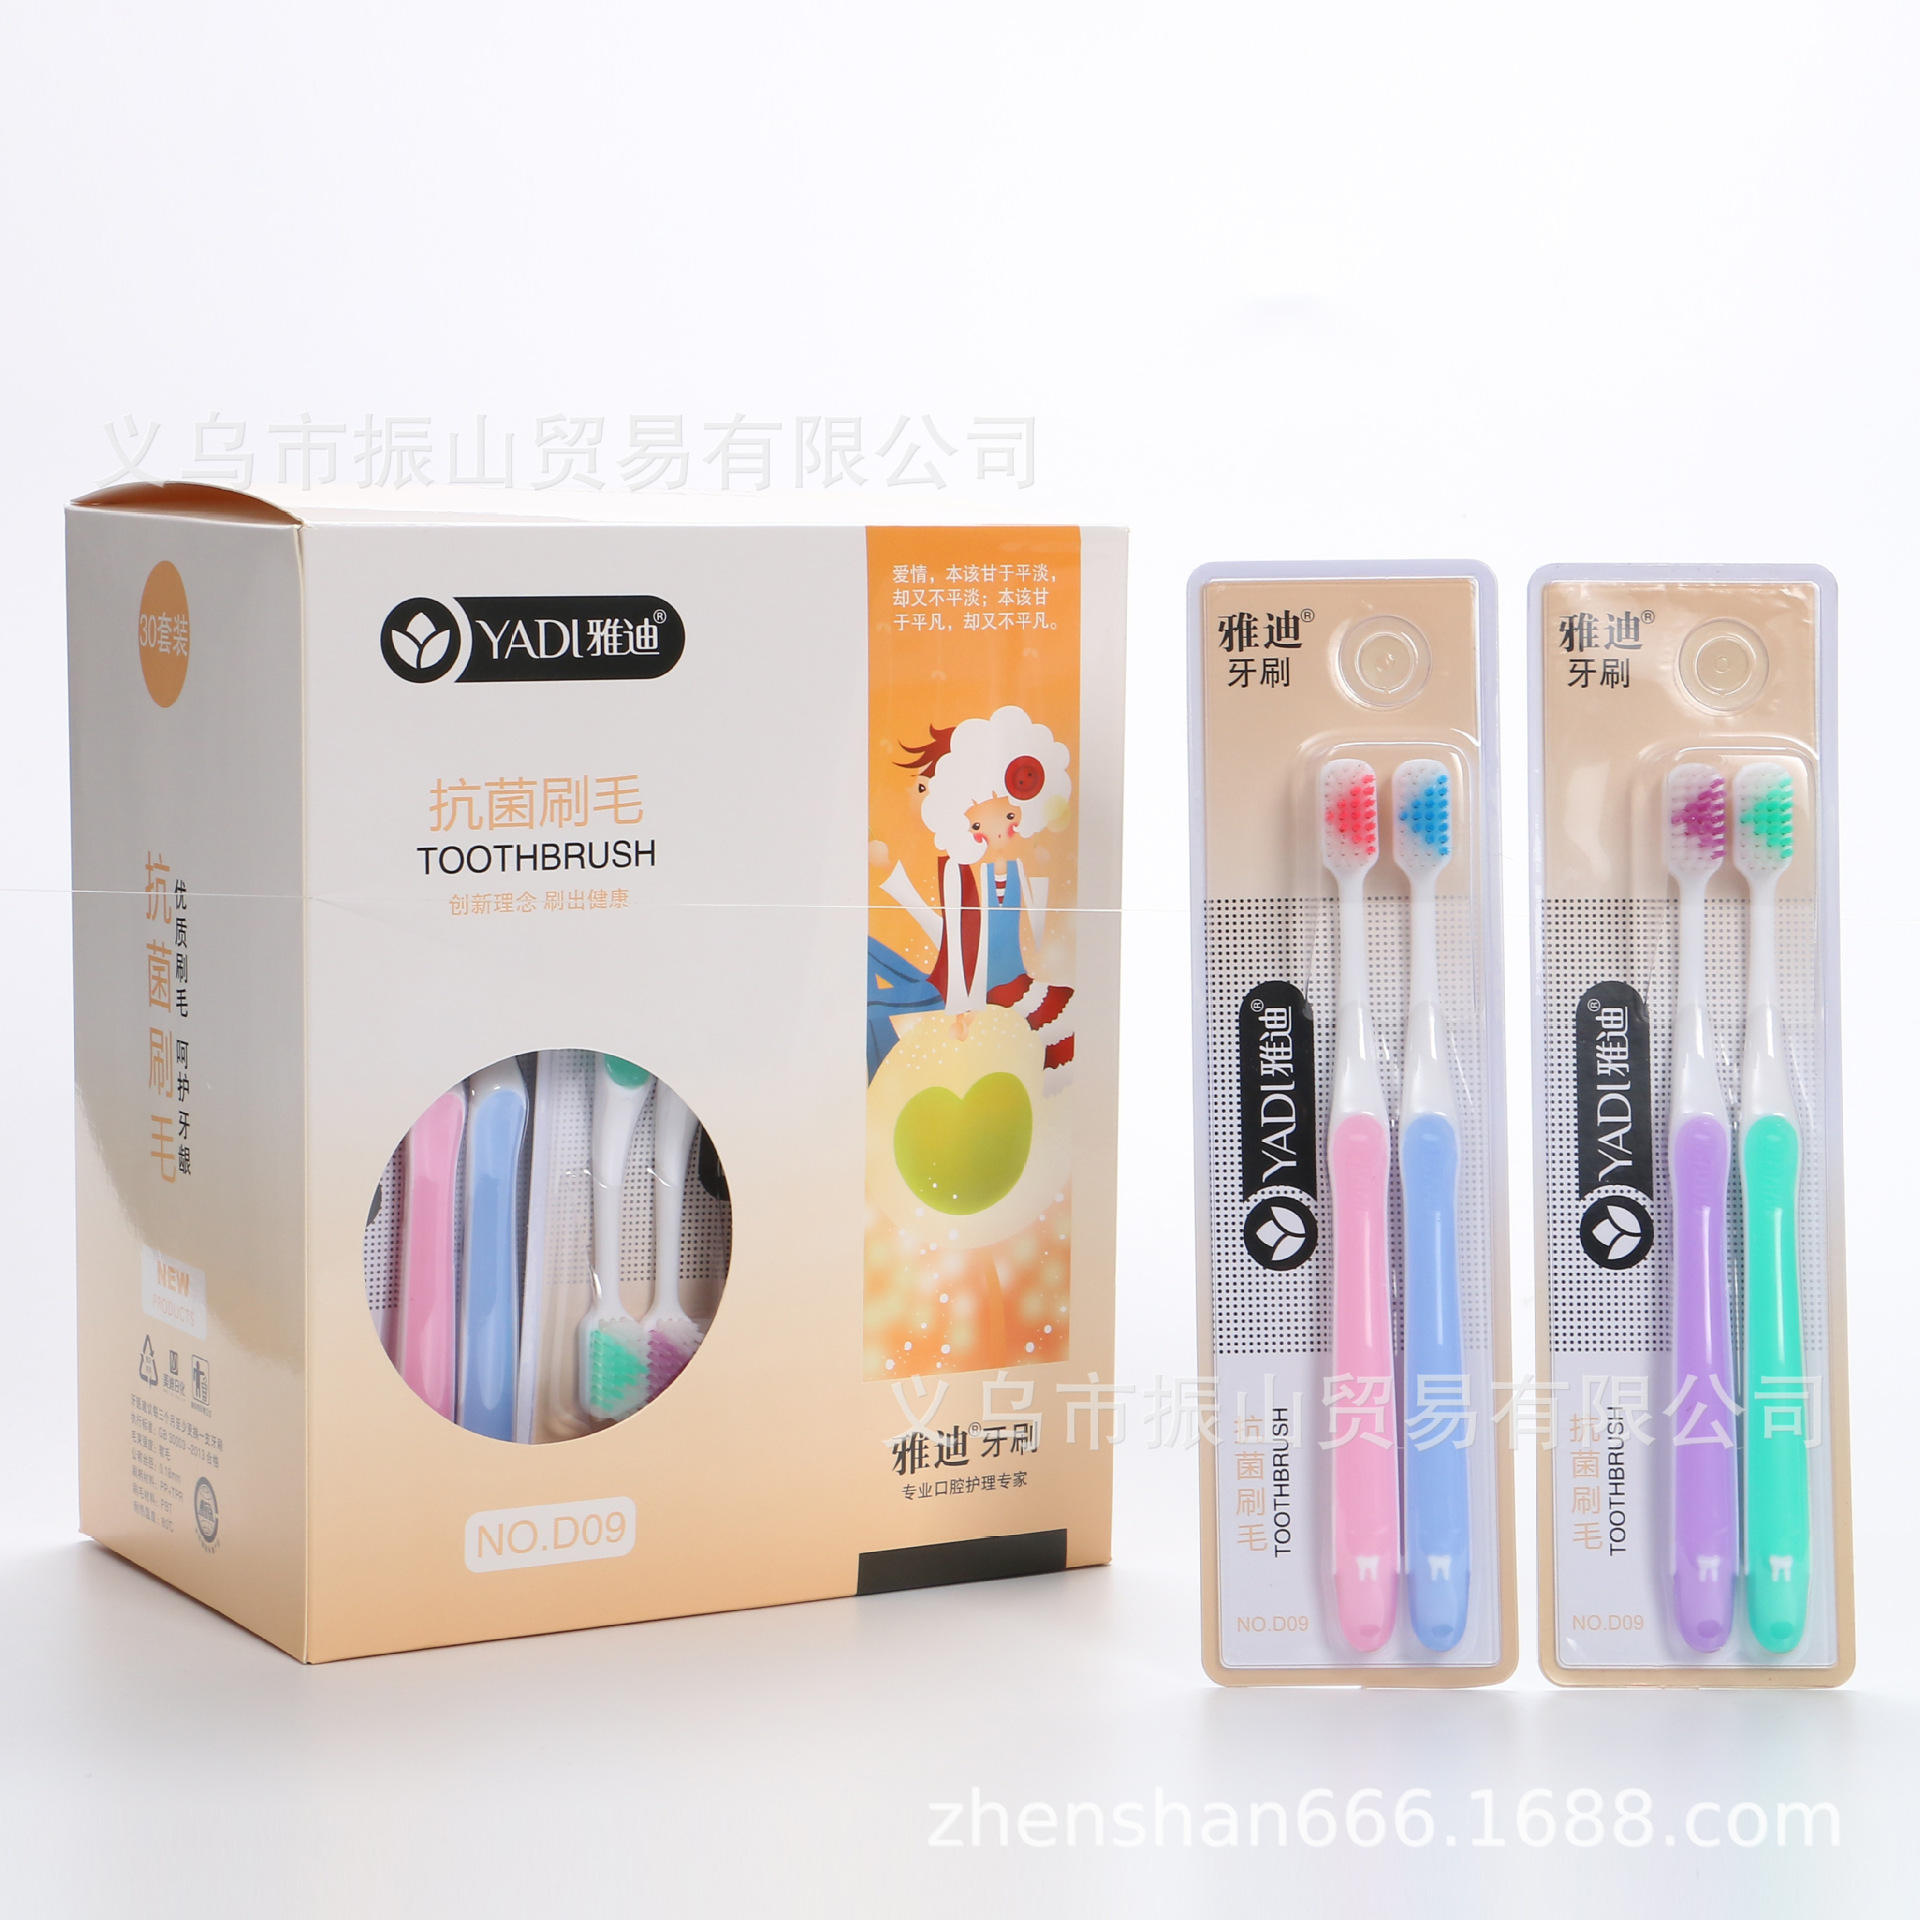 Yadi D09 Love Should Be Willing to Plain Yadi Couple Soft Hair toothbrush for Life